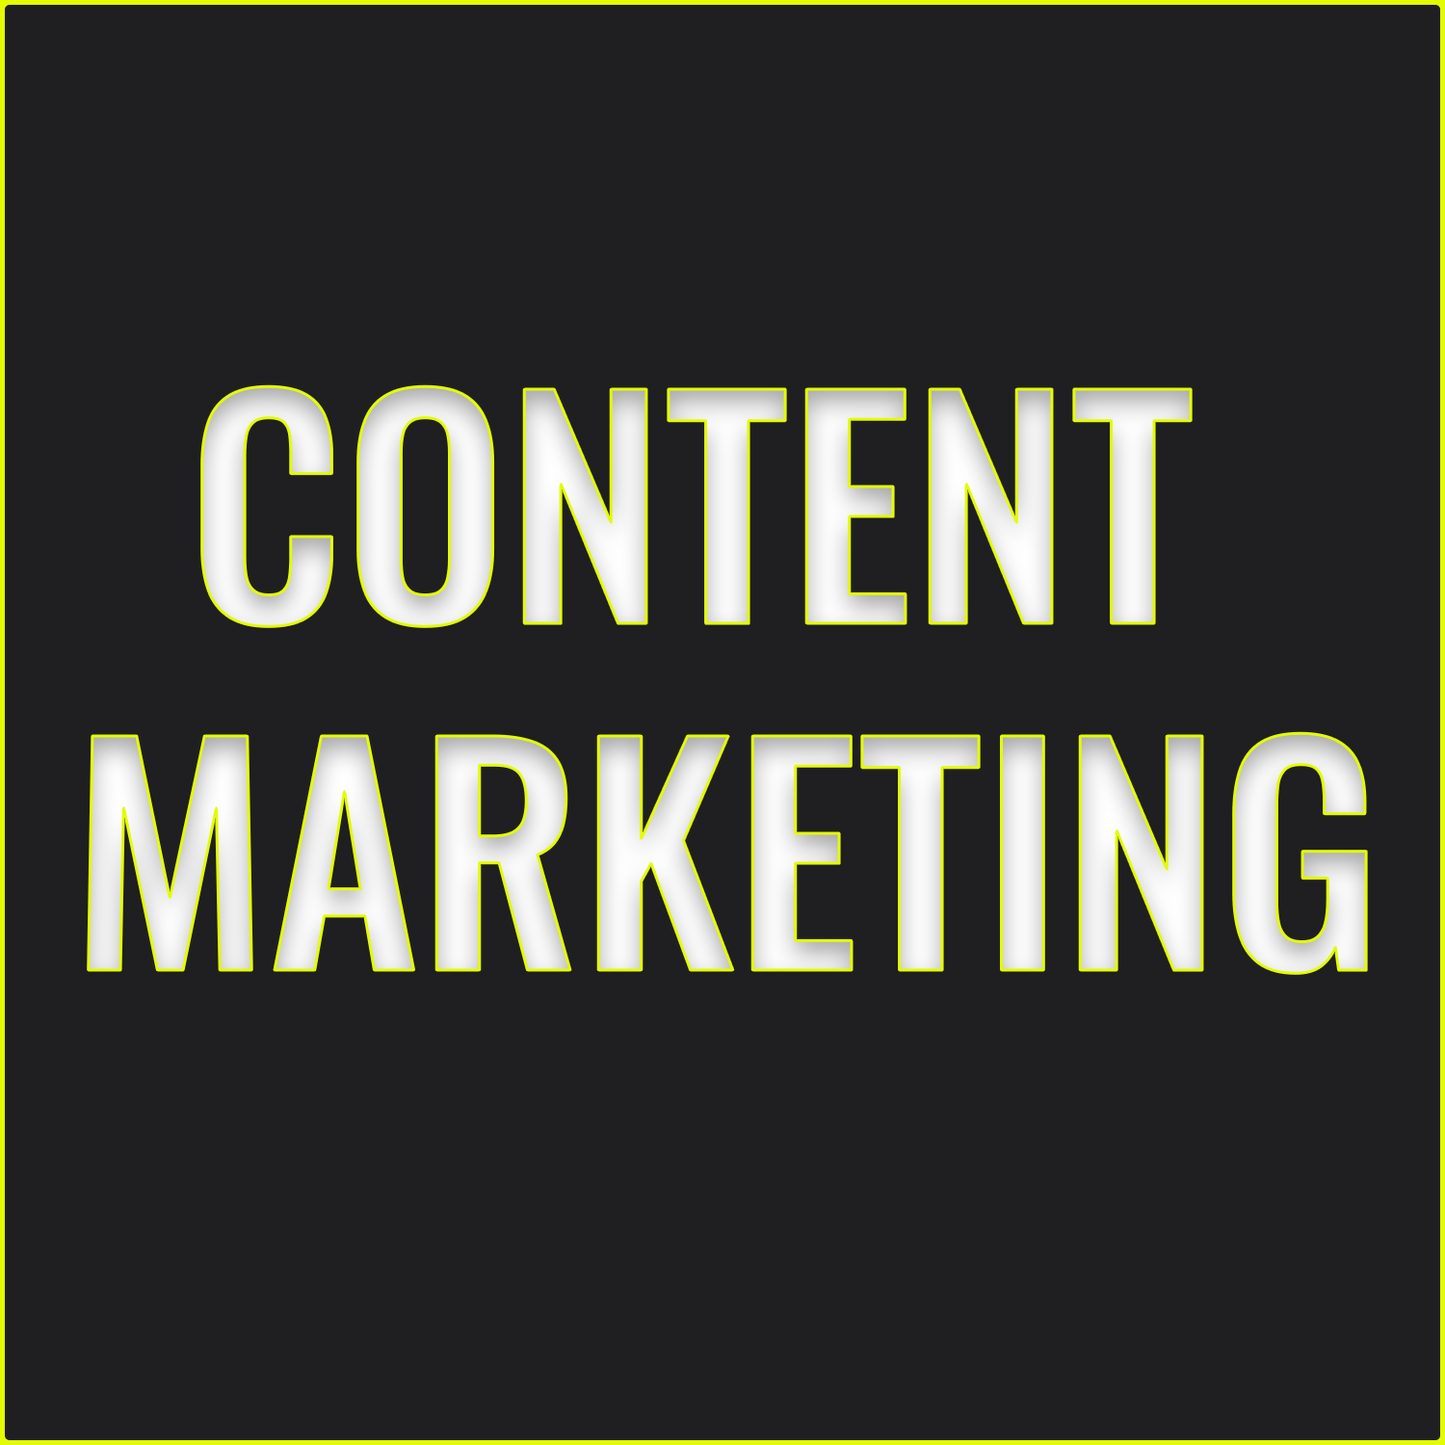 Content Marketing - Strategy, Creation, And Promotion